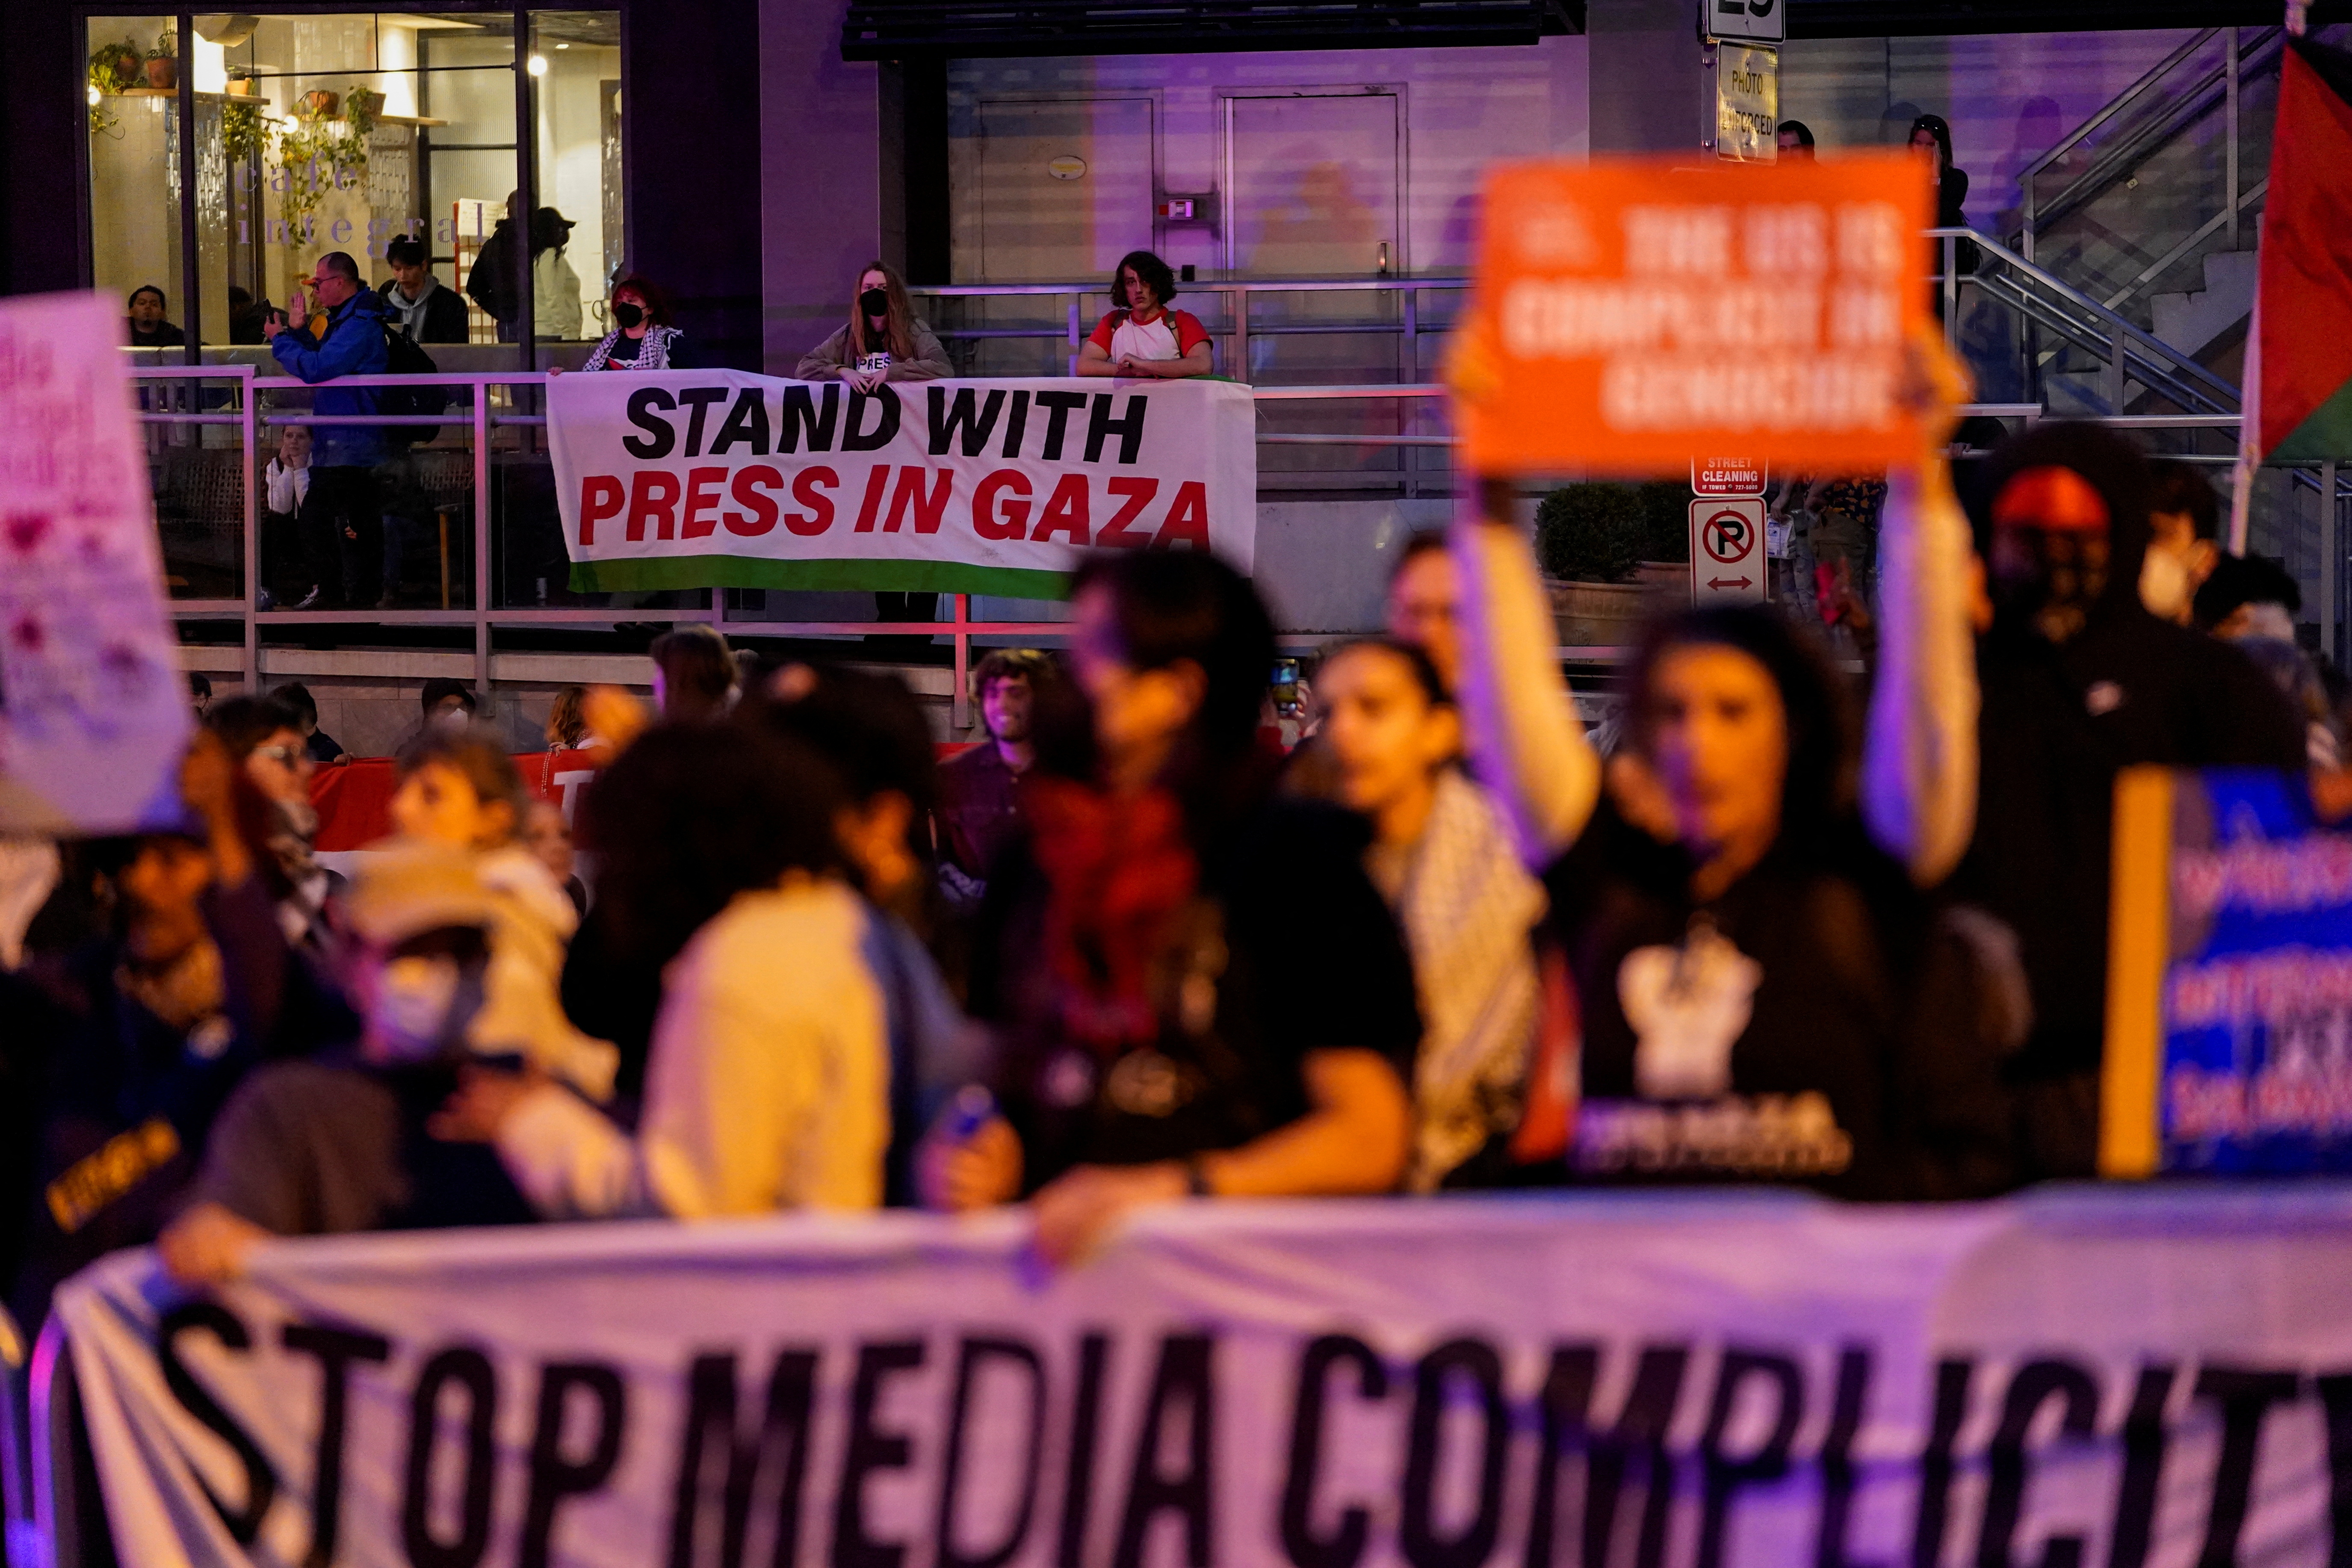 People demonstrate in support of Palestinians in Gaza, during a protest near the annual White House Correspondents’ Association (WHCA) Dinner in Washington